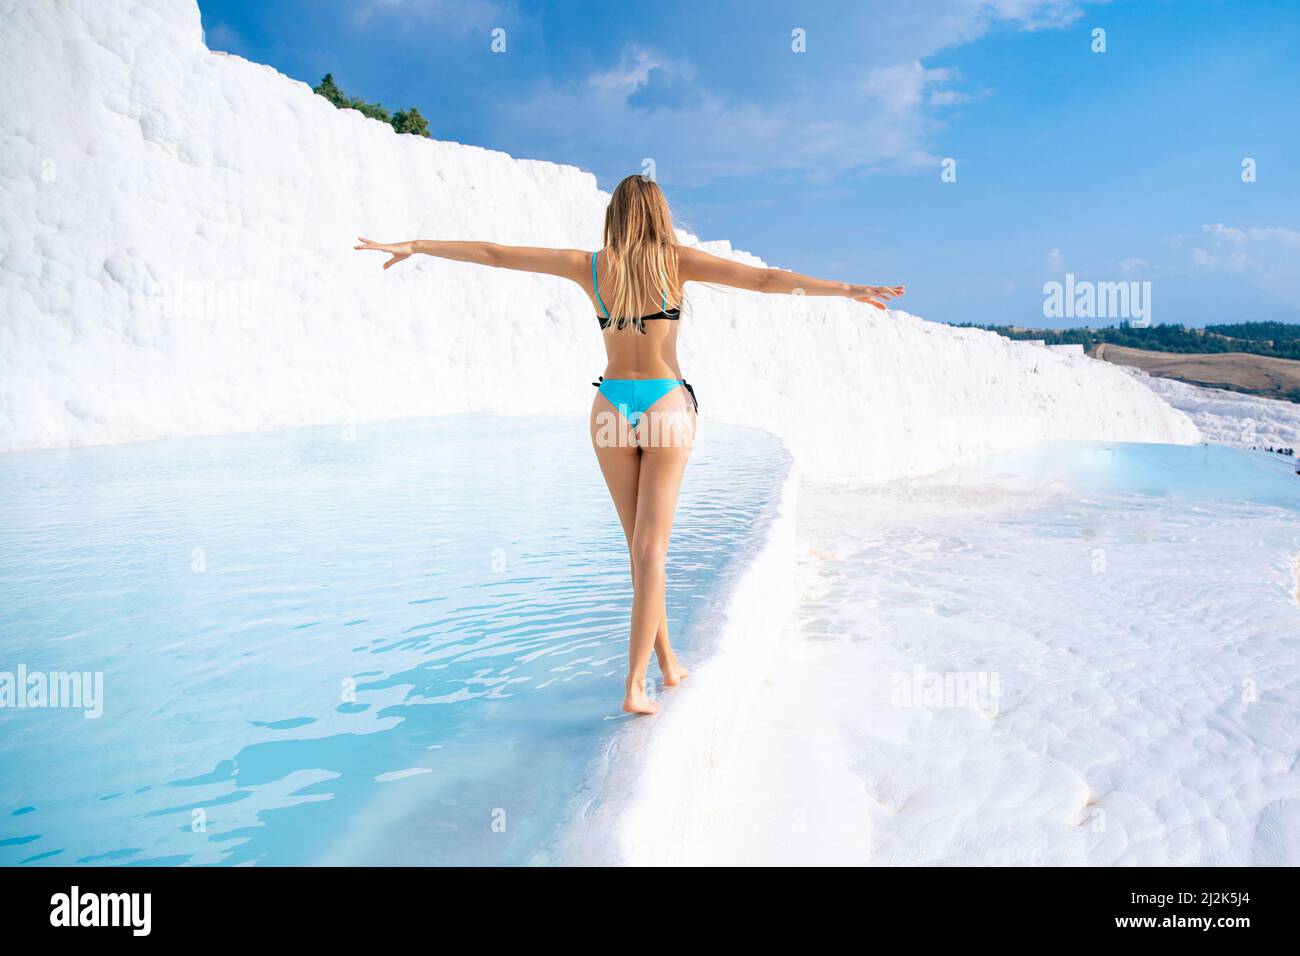 Pamukkale Turkey Tourist young woman in swimsuit background